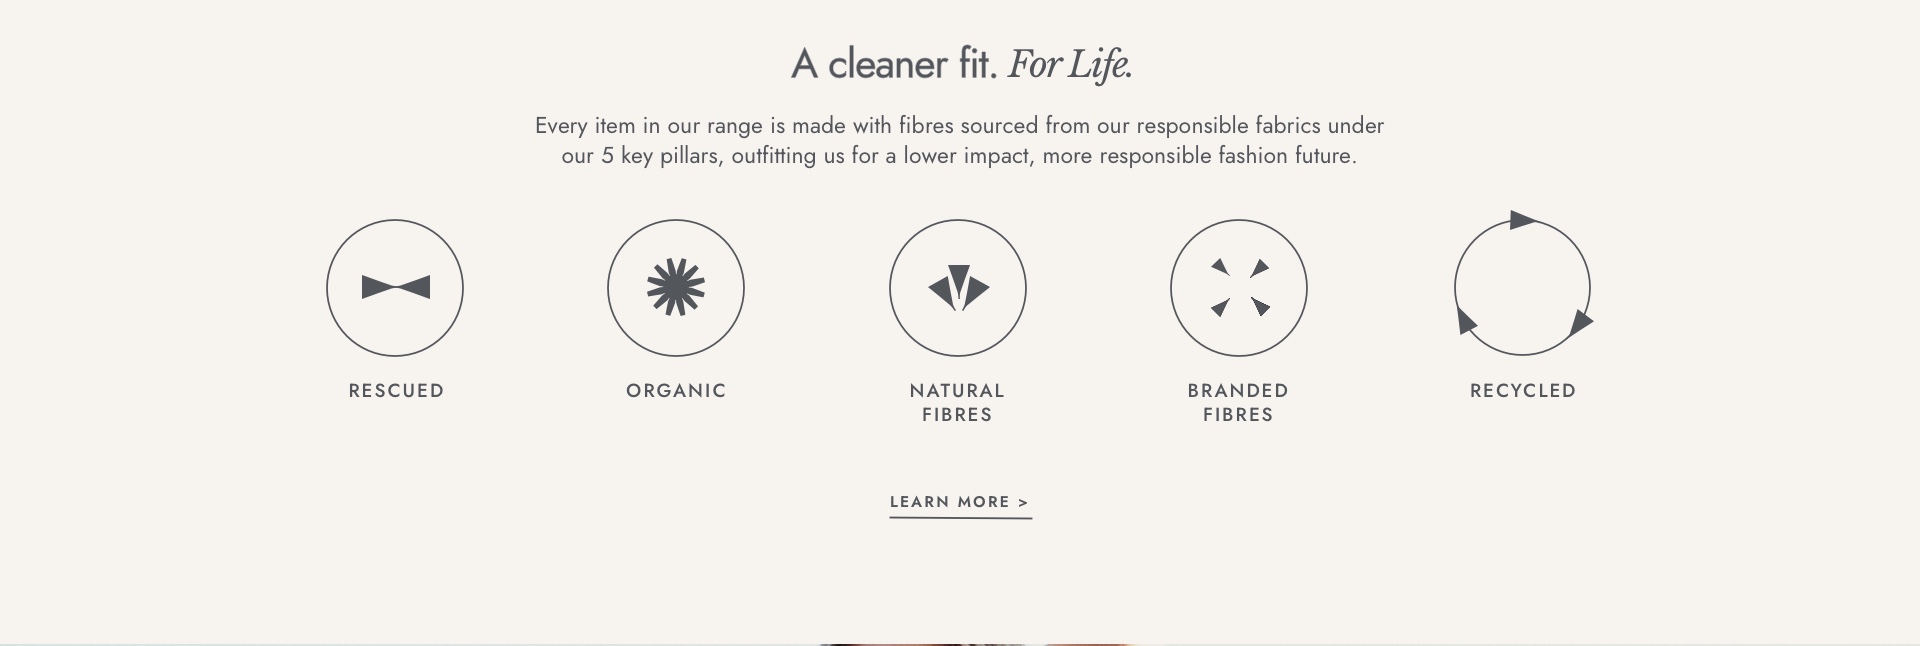 A cleaner fit. For life. Read more.